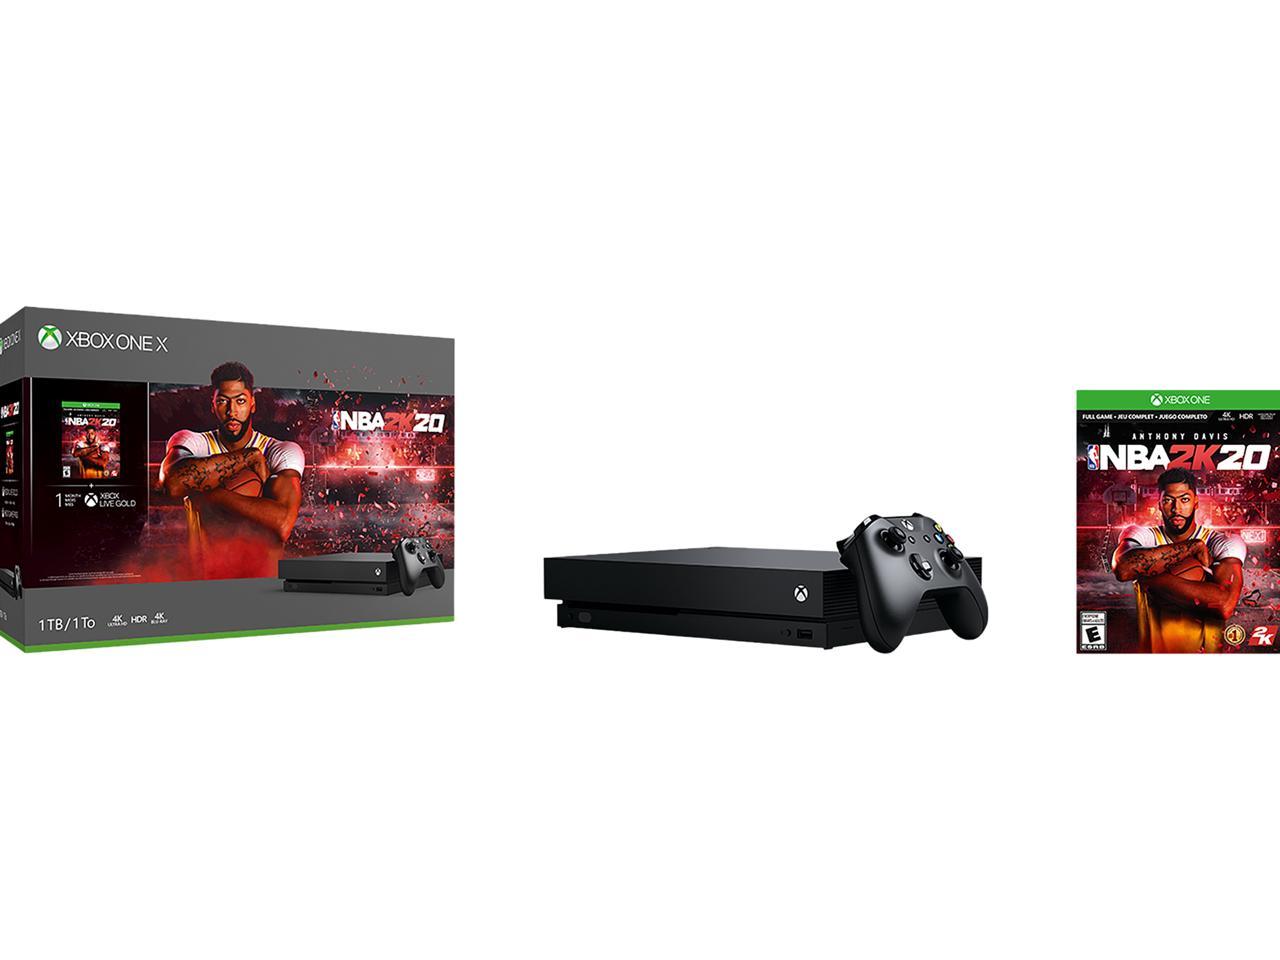 kinect games xbox one x